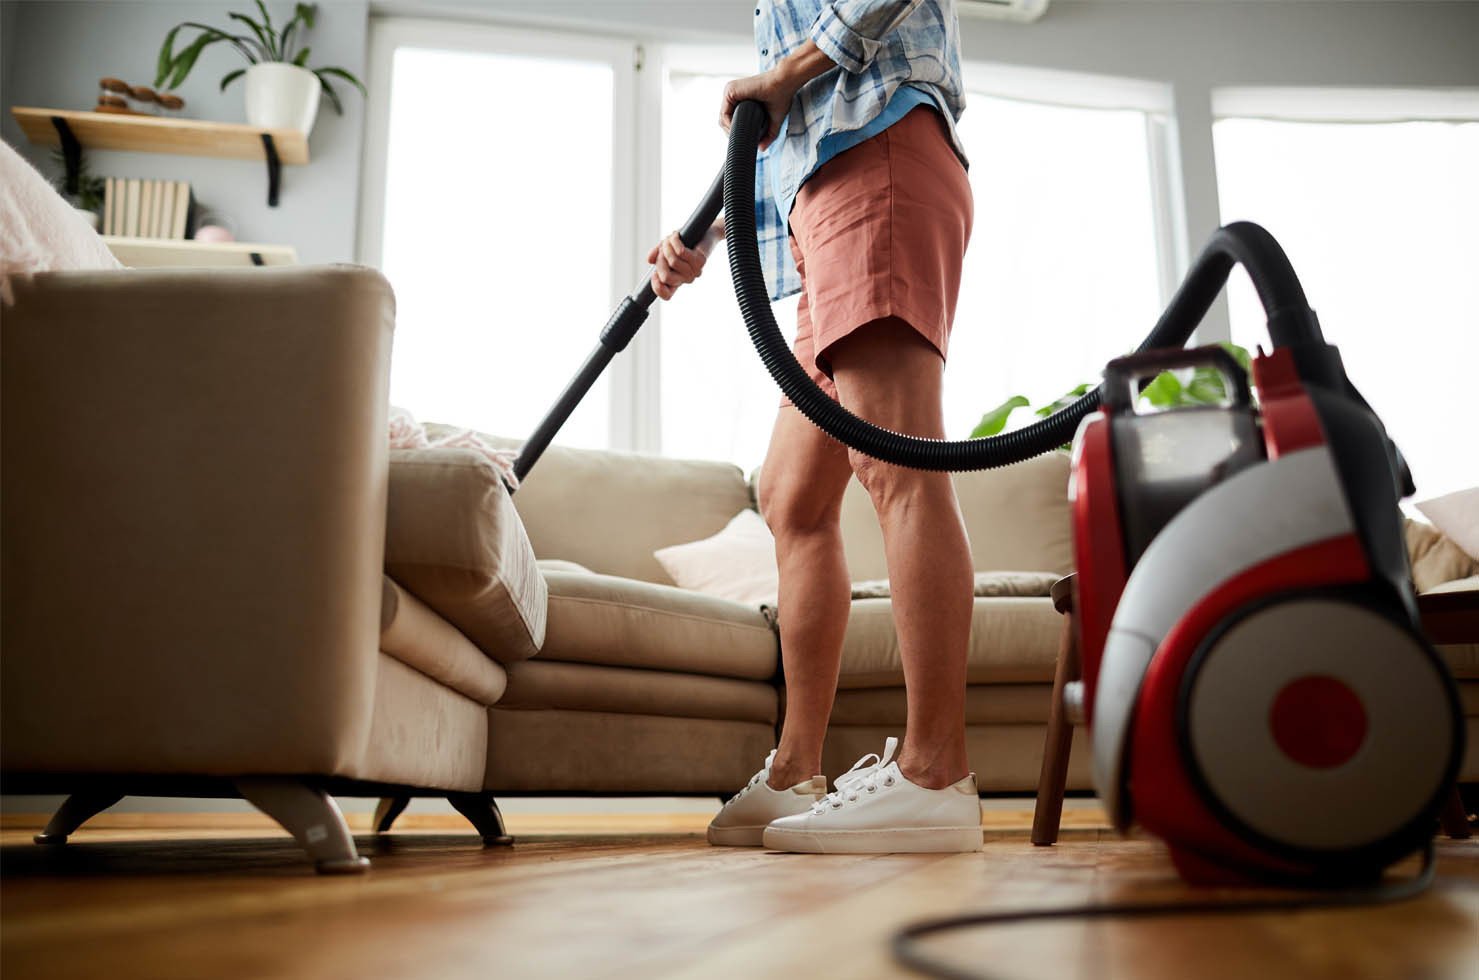 cleaning-sofa-with-vacuum-cleaner-at-ace-hardware-owenhouse- Bozeman, Montana